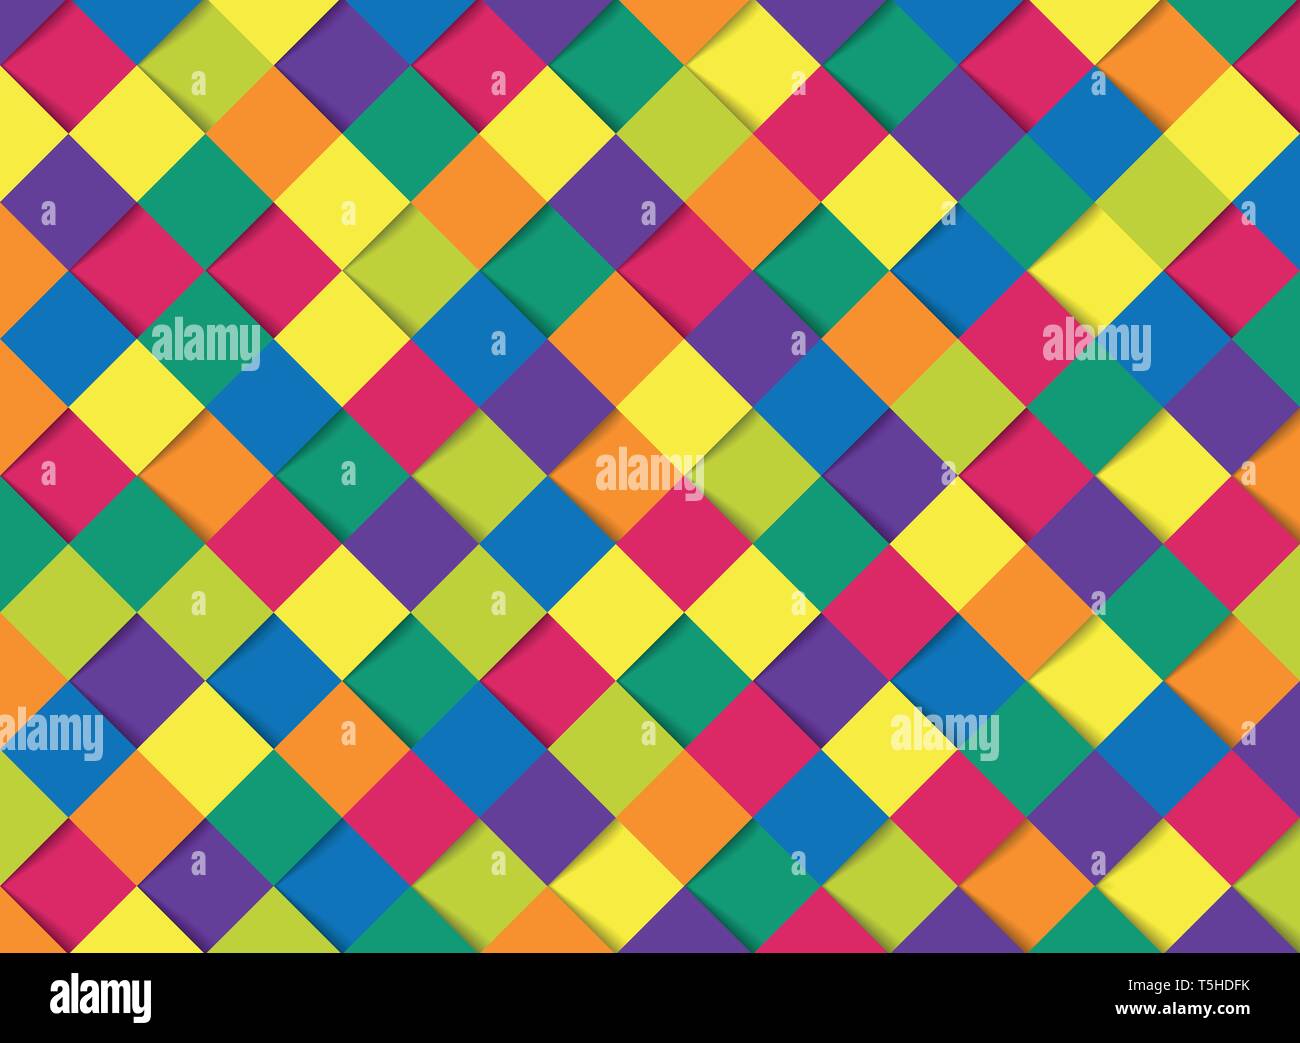 Abstract colorful square geometric pattern of paper cut design template background. You can use for ad, poster, artwork, design, print, template. Stock Vector